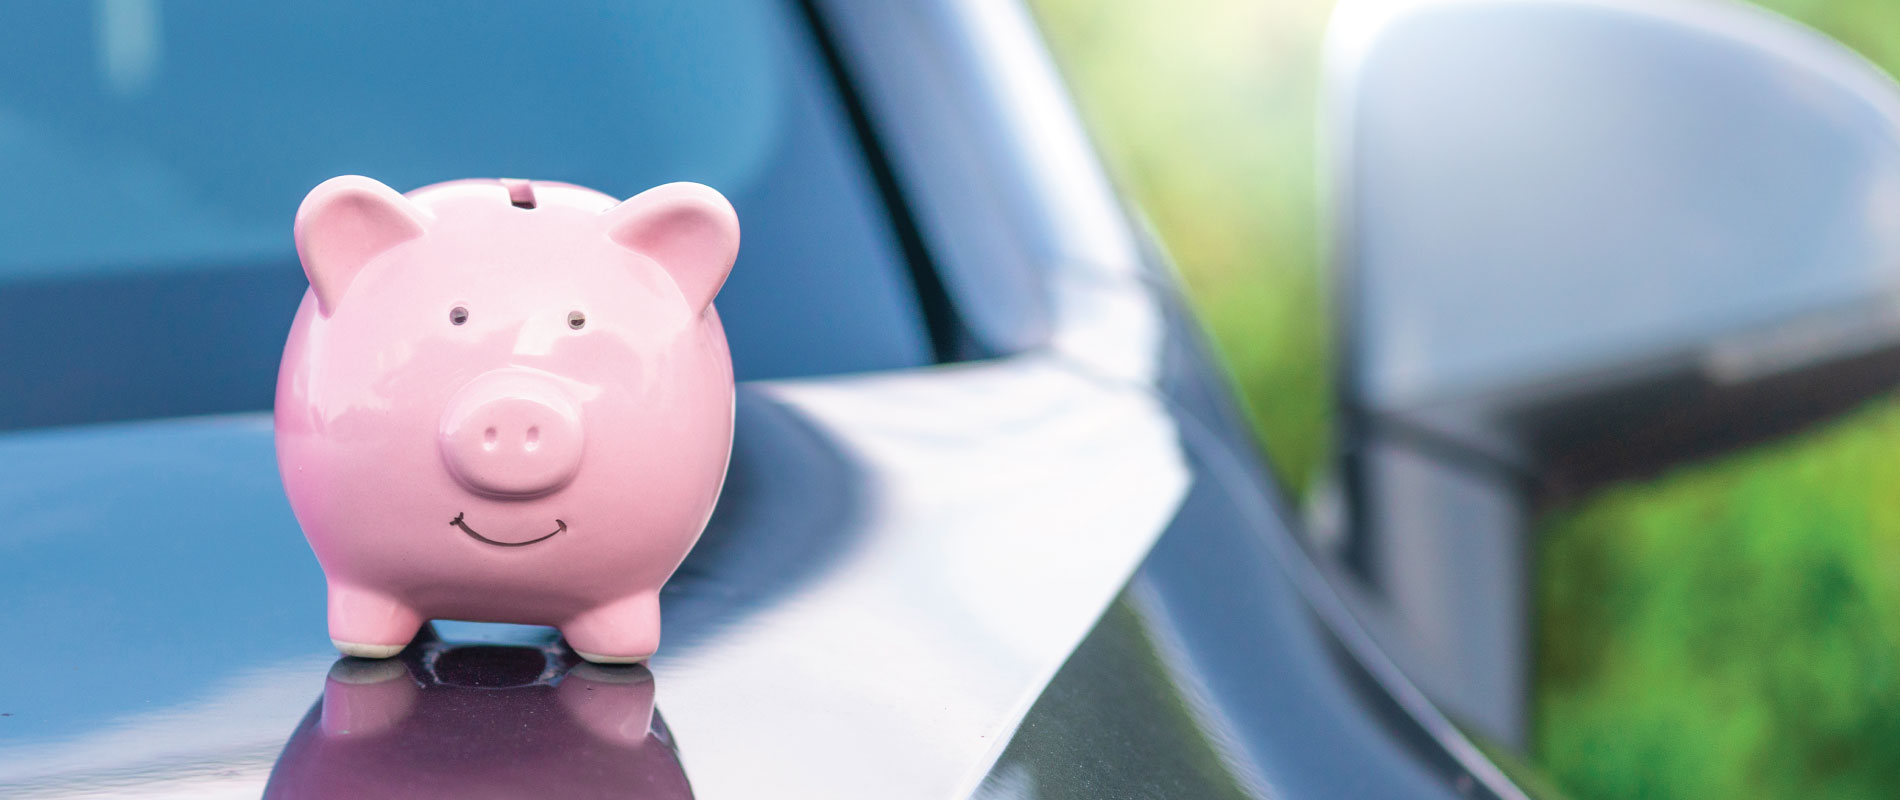 Auto Loan Refinance: What’s the Best Option for Me?